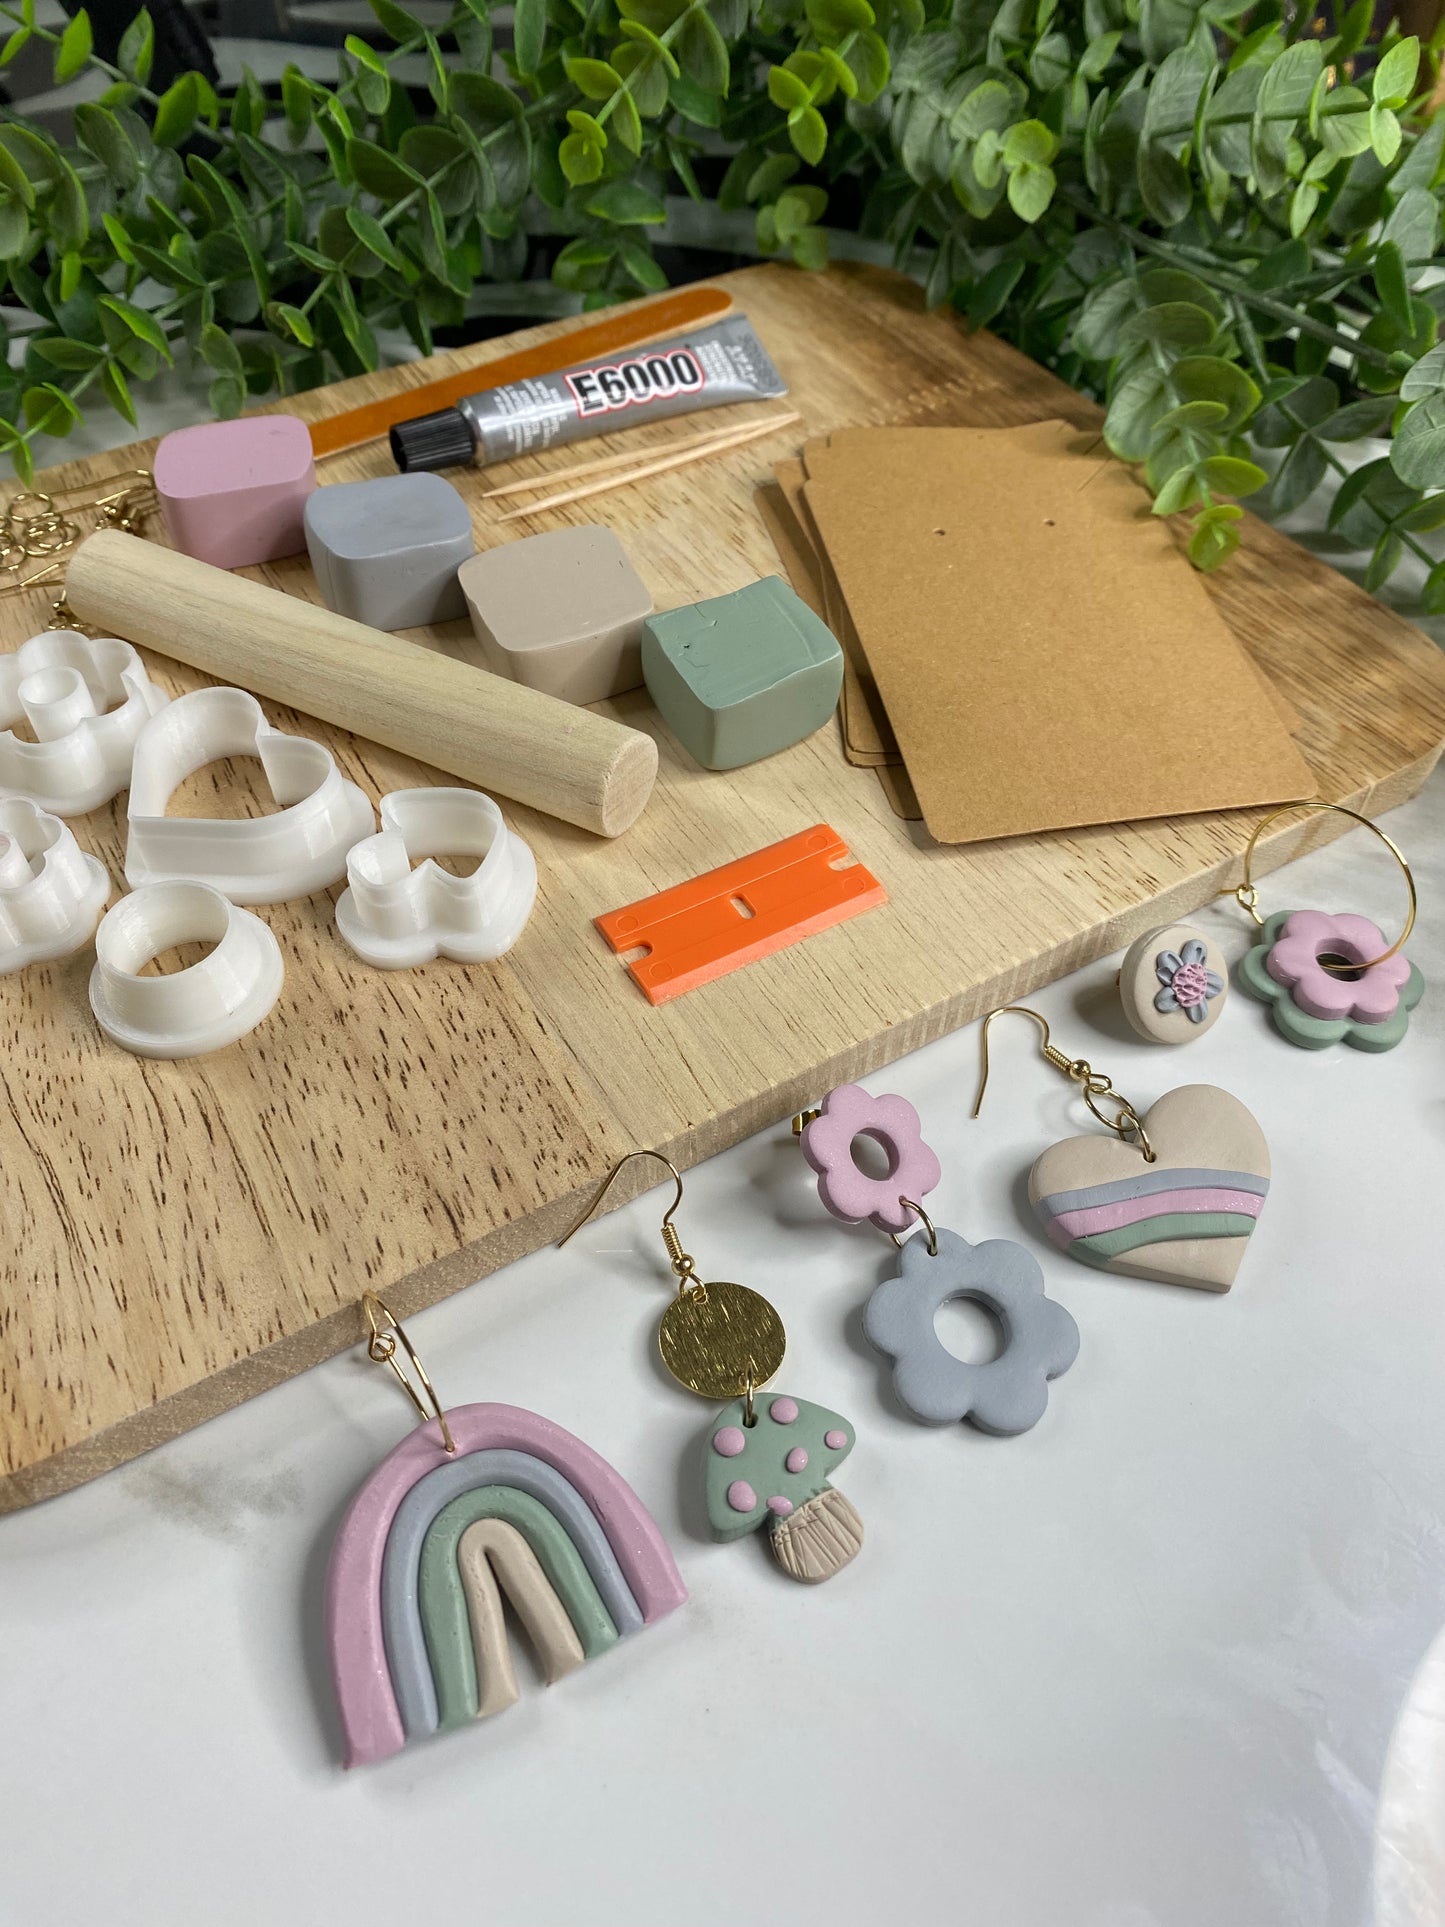 DIY Polymer Clay Earring Kit - SPRING RETRO BOX - Makes 6 sets of Earrings- Guided Video Tutorial